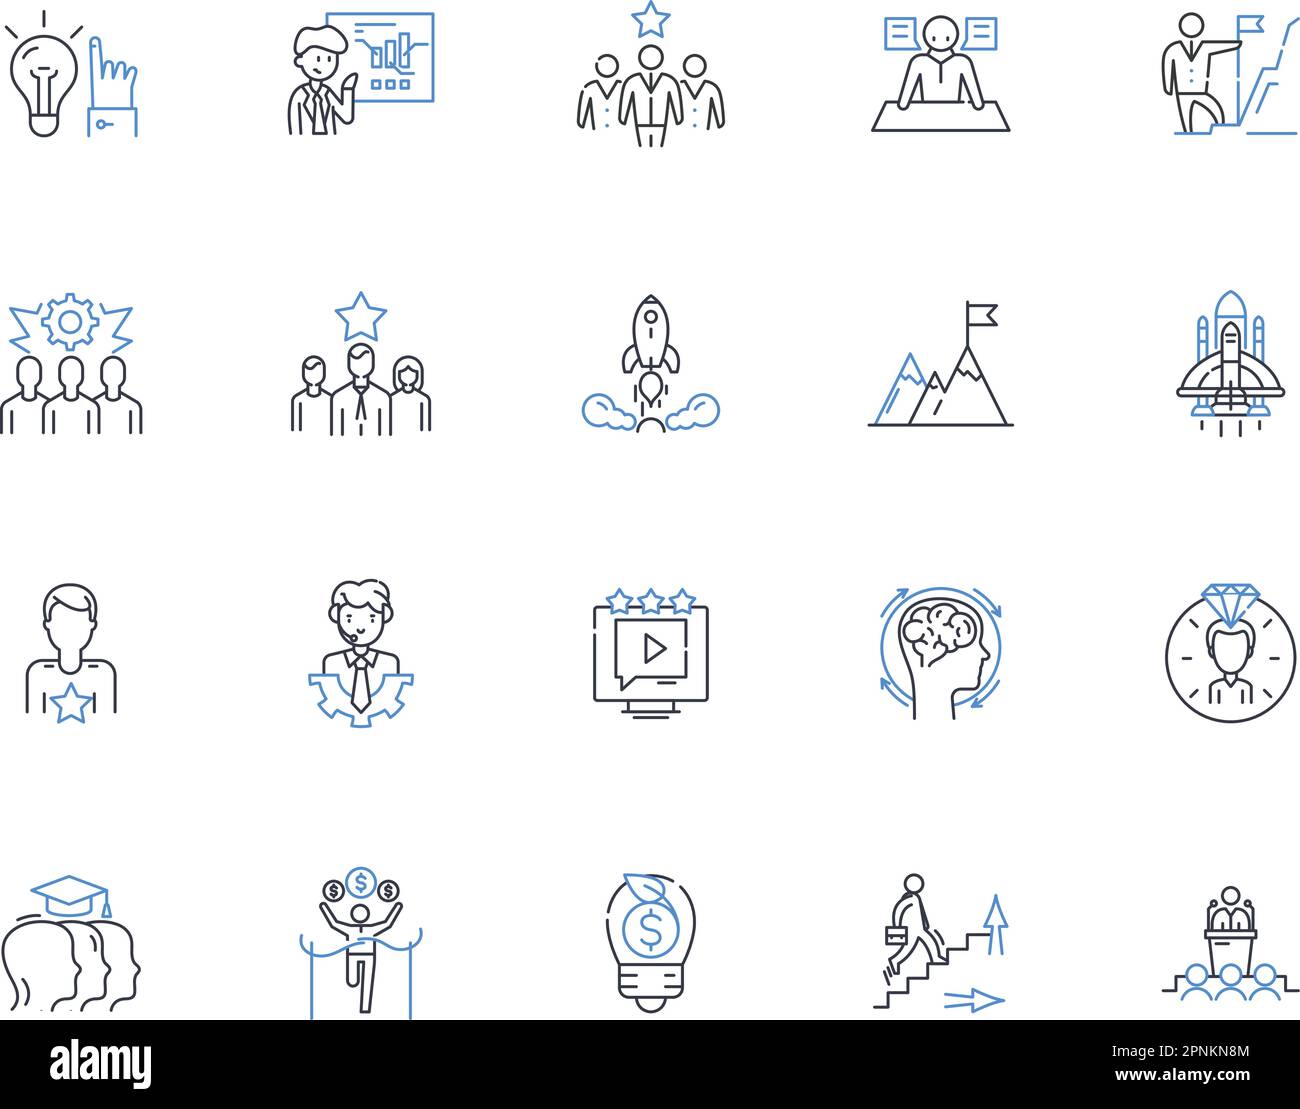 Stewardship business line icons collection. Sustainability, Responsibility, Conservation, Ethics, Accountability, Environmentalism, Preservation Stock Vector